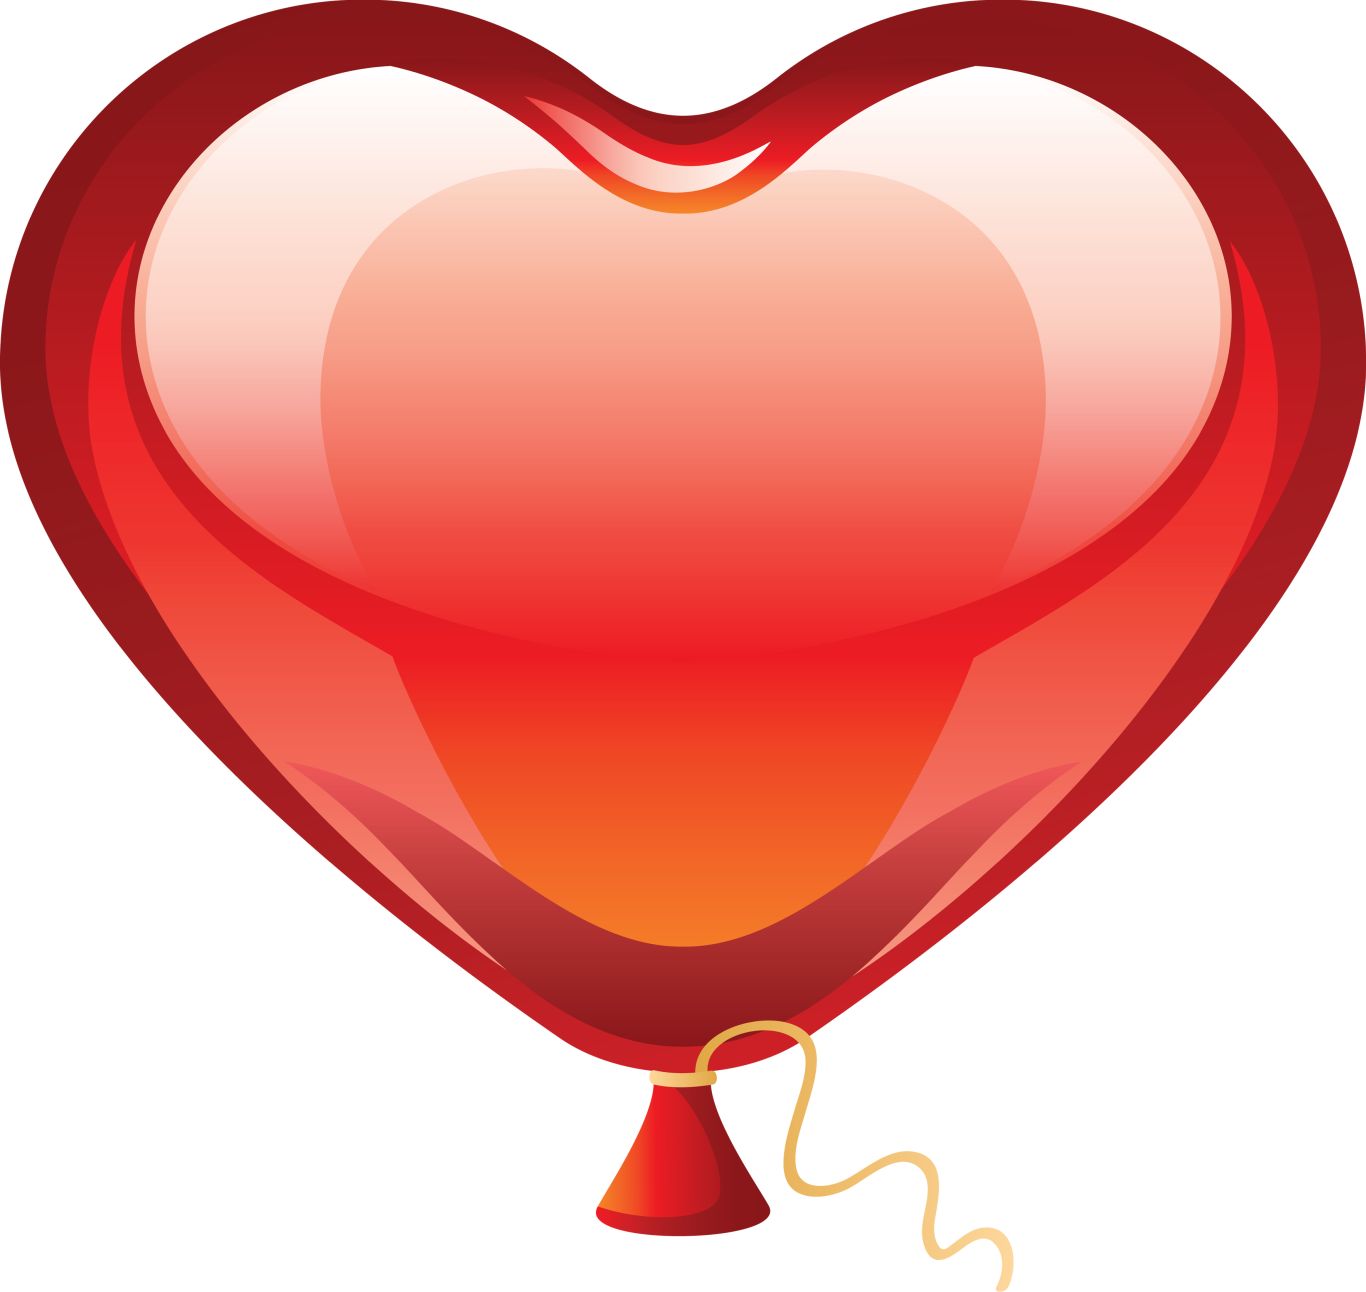 Heart balloon PNG image, free download, heart balloons    图片编号:3392